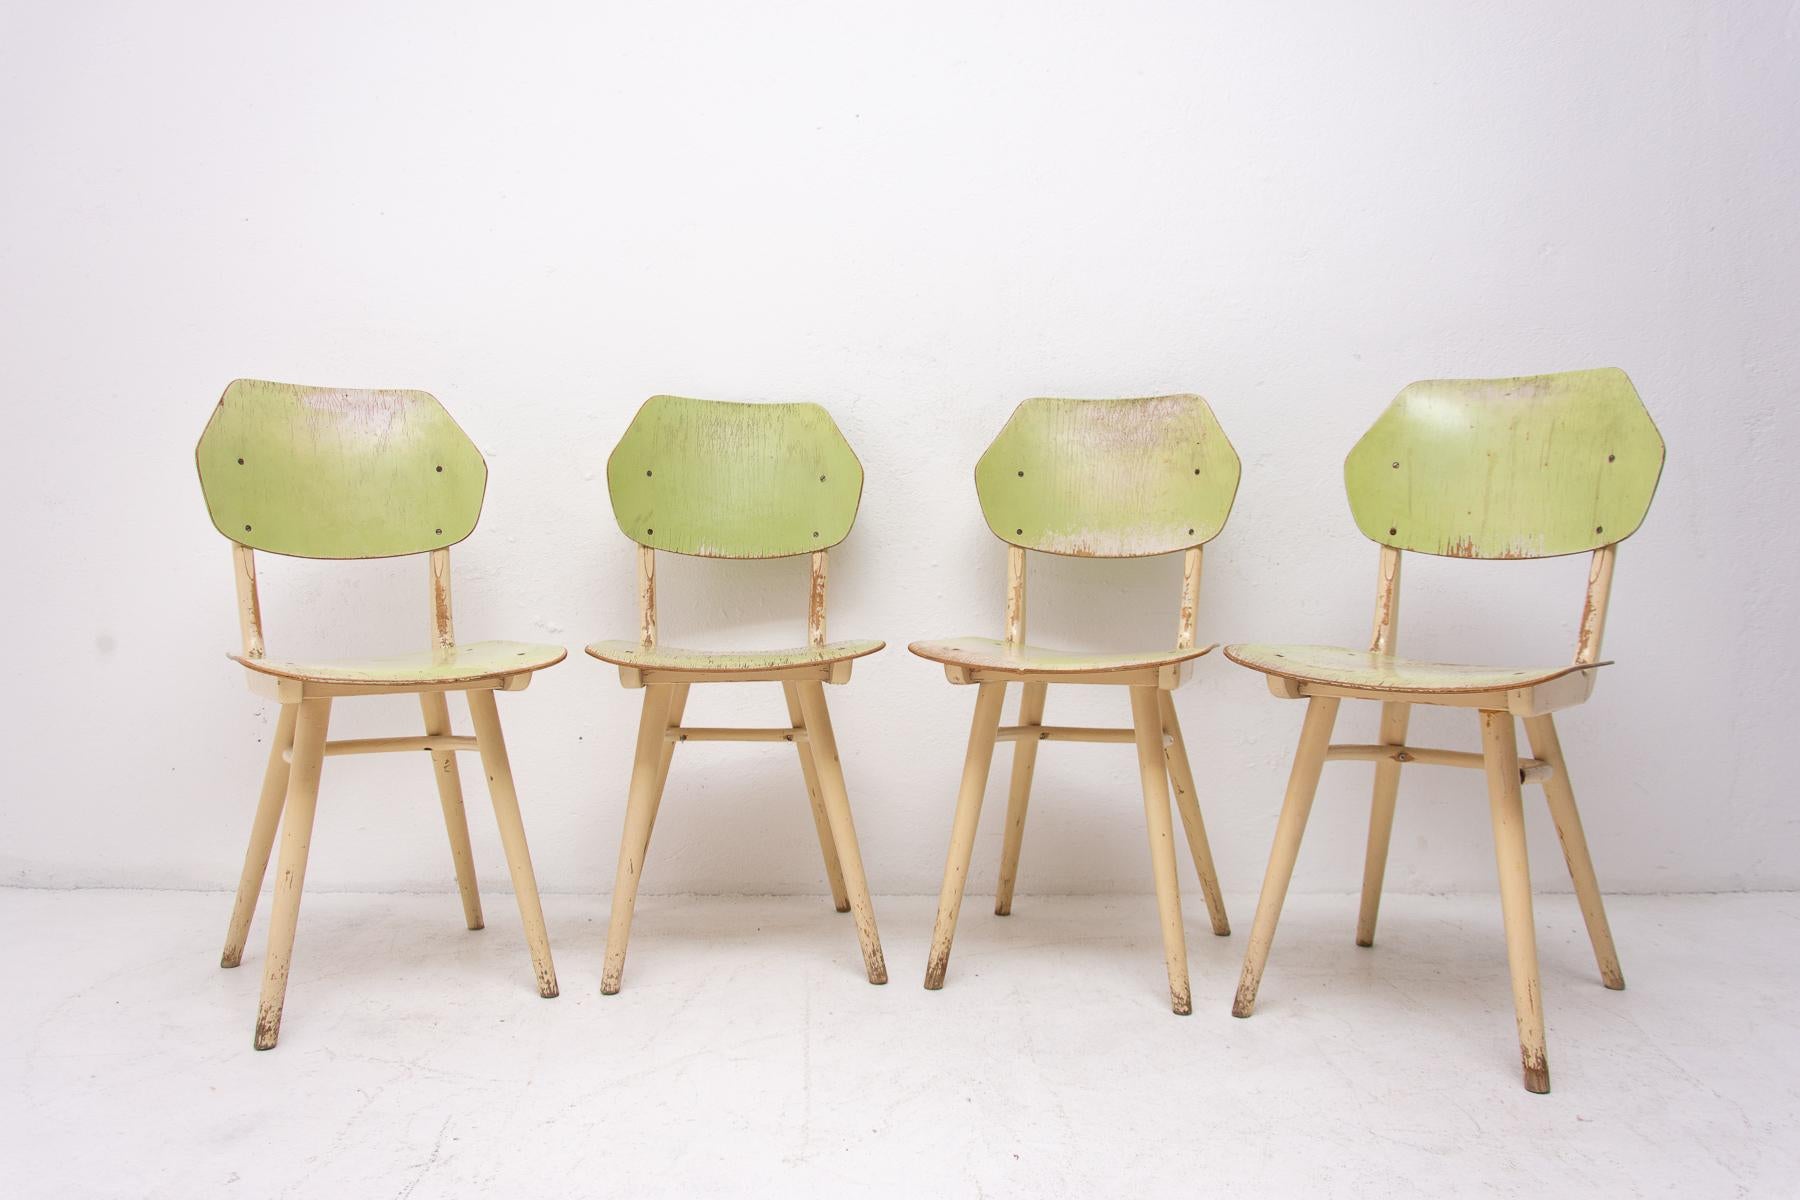 Set of four patinated dining chairs from the 1960s. It was produced by TON, Czechoslovakia. The TON company was established as successor to the famous Thonet after World War II in Czechoslovakia and continued the production of bentwood furniture. It